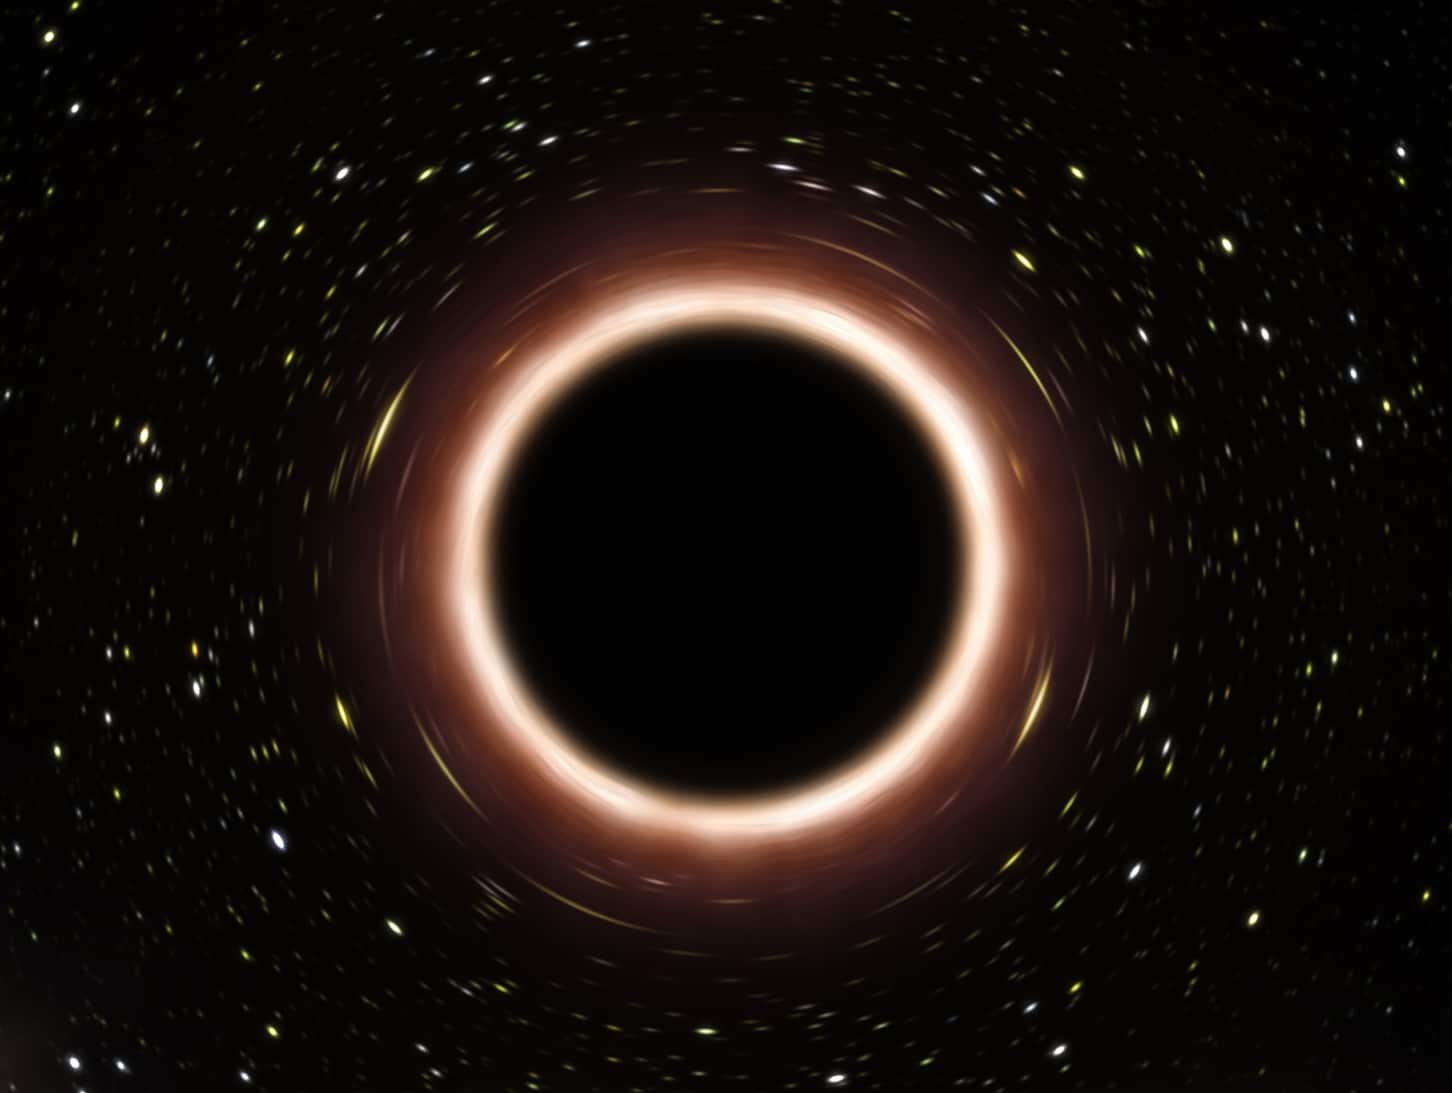 Astronomers Unveil 12 Billion Years of Supermassive Black Hole History